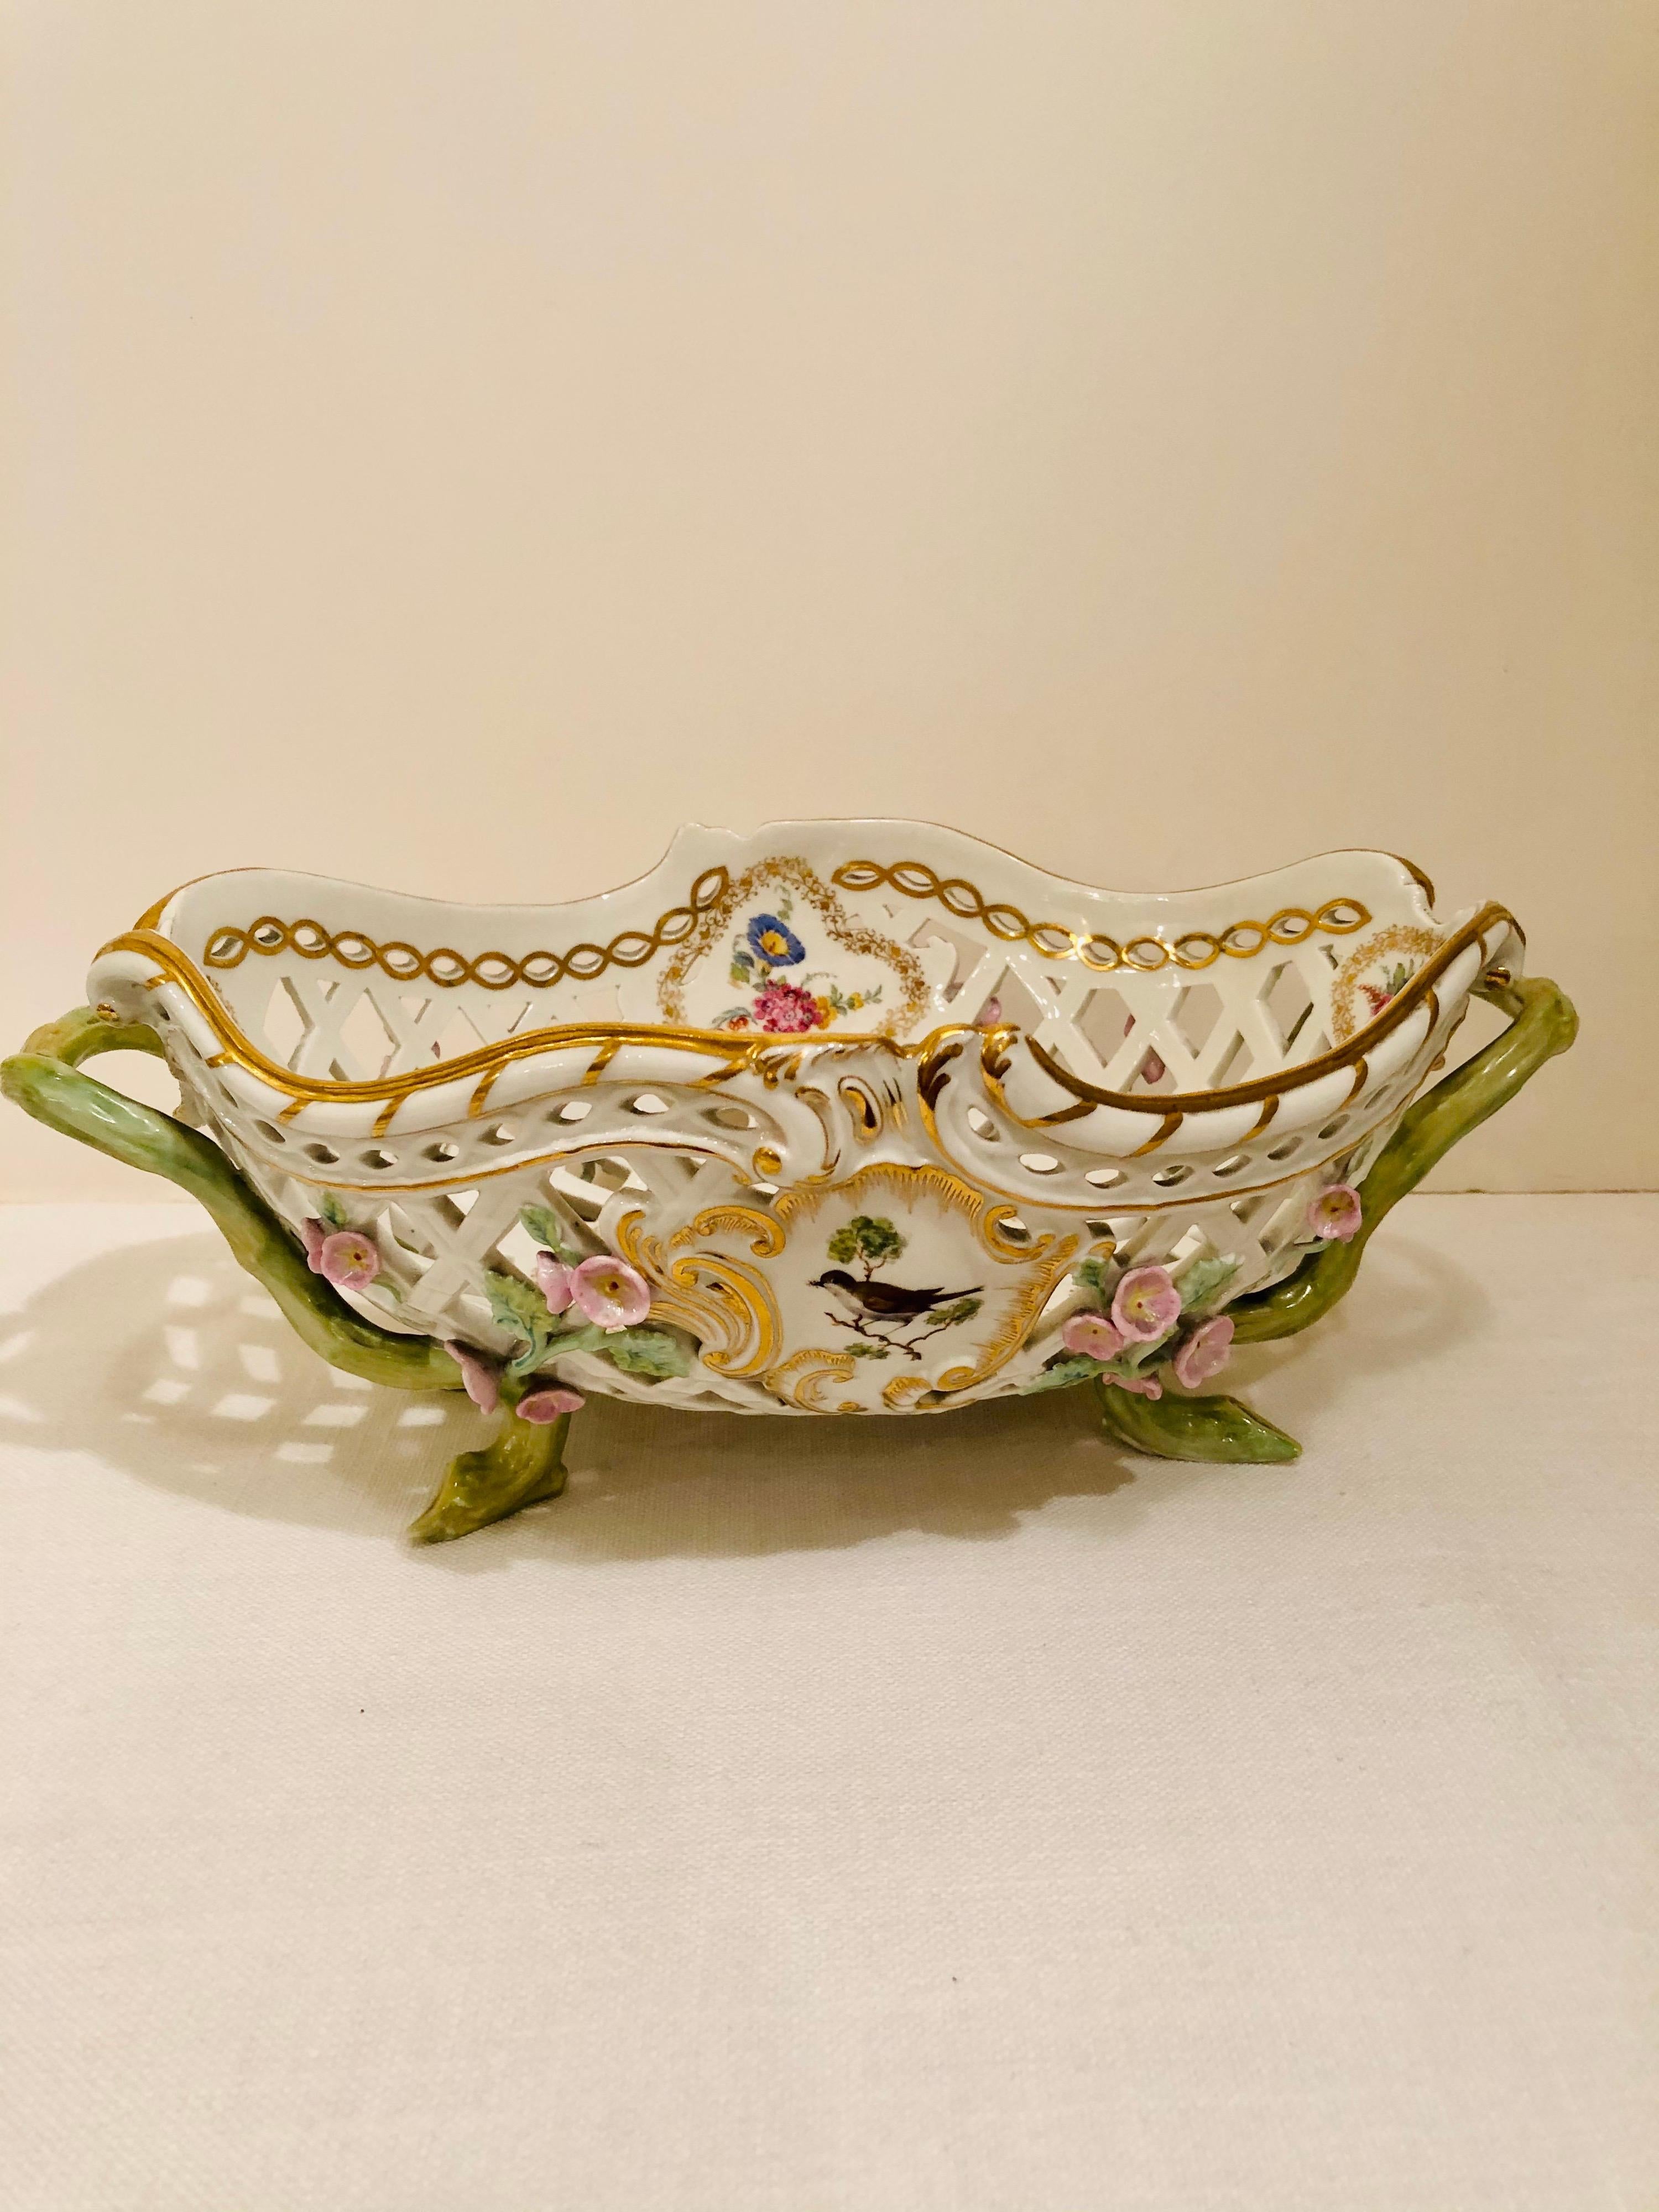 KPM Openwork Bowl with Raised Pink Flowers and Painted Birds on Both Sides For Sale 5